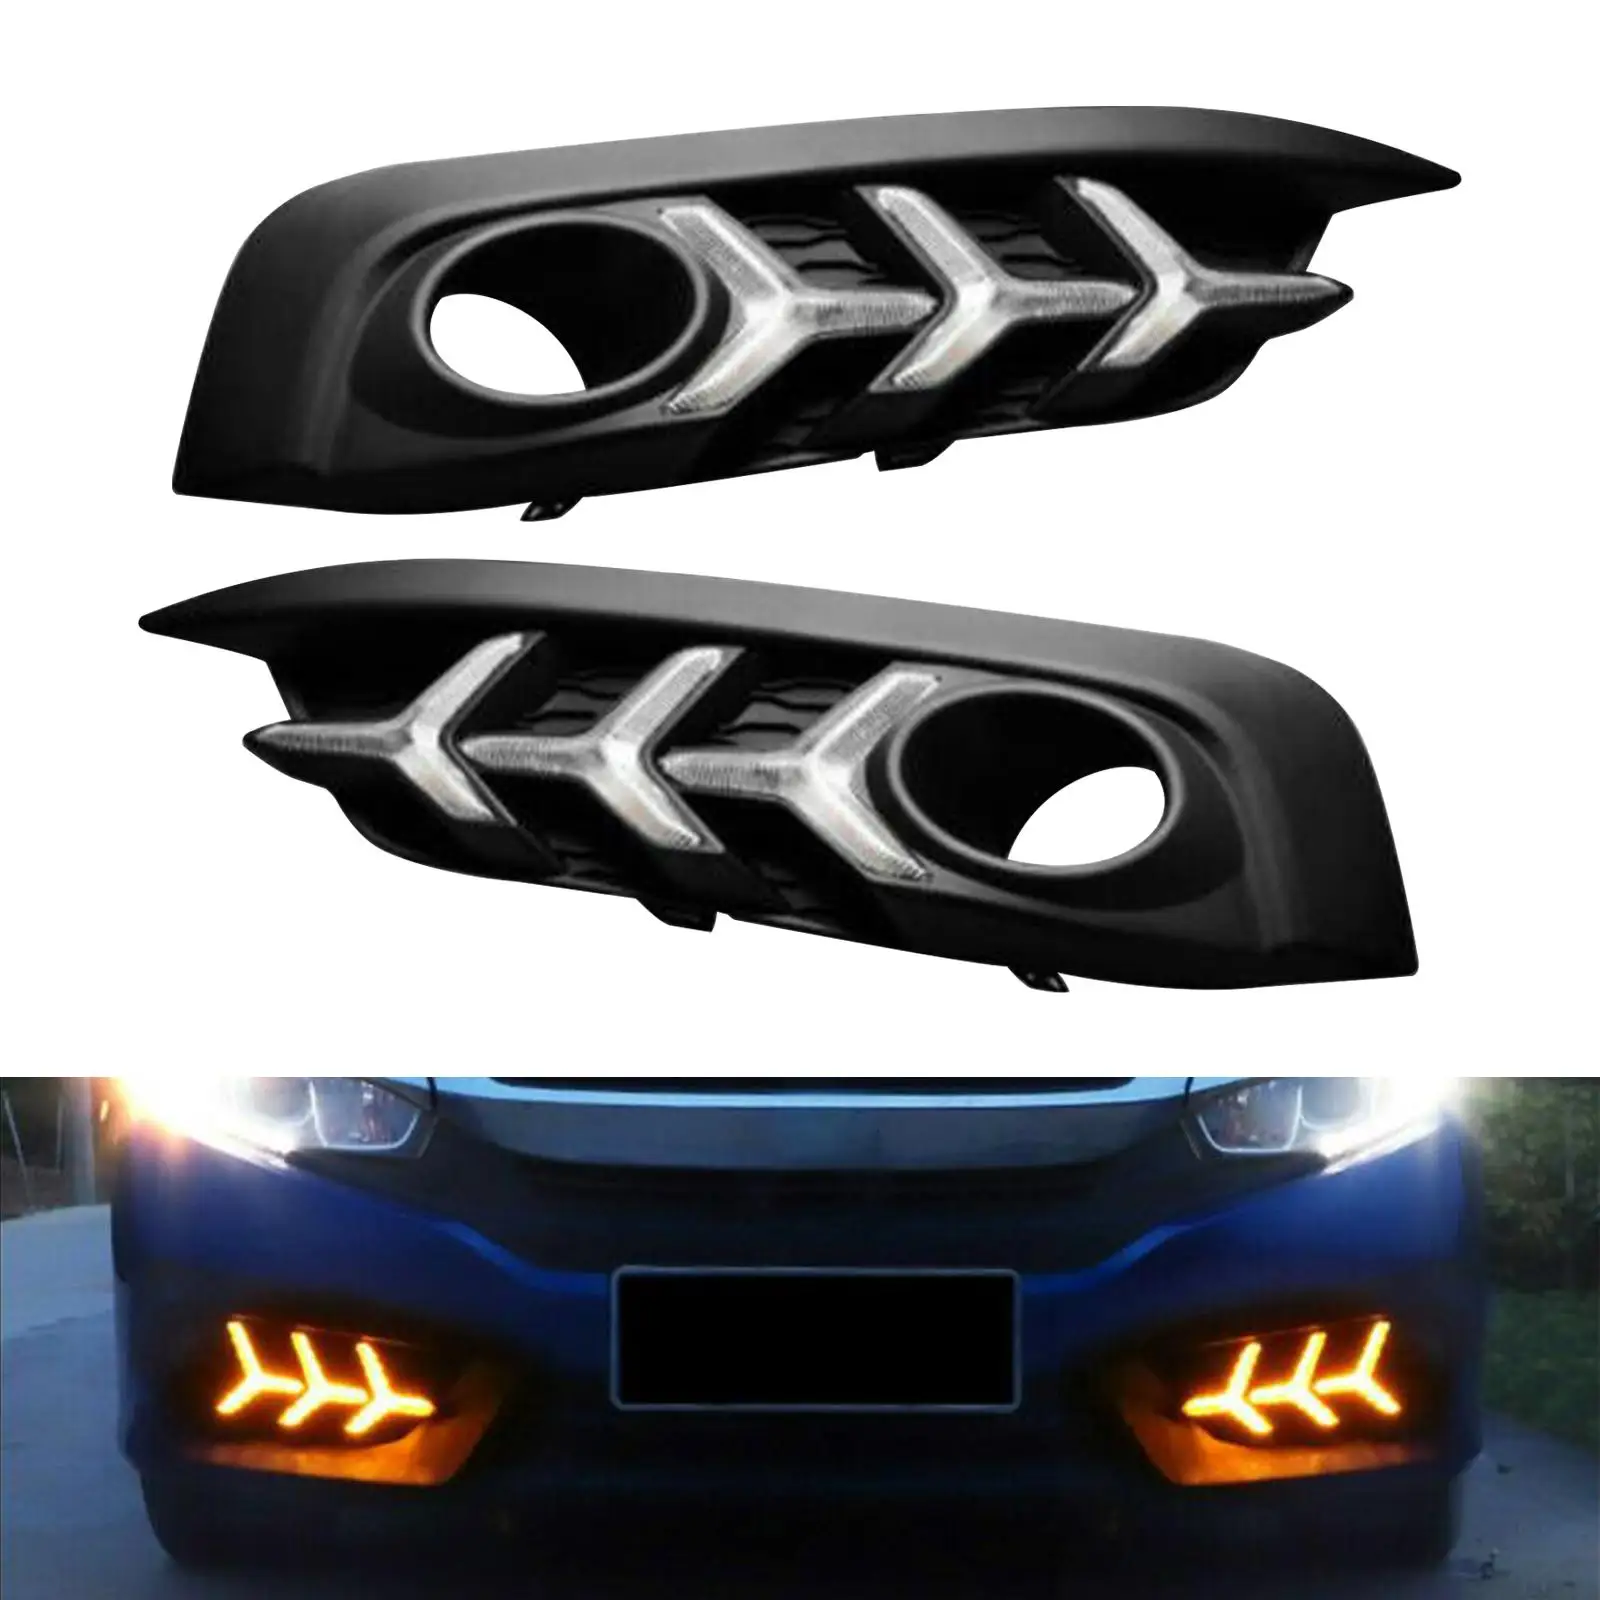 

2x Drl LED Daytime Running Light 3 Light Color LH Rh Fog Lamps Fits for Honda Civic 2016 2017 2018 with Turn Signal Drl Fog Lamp